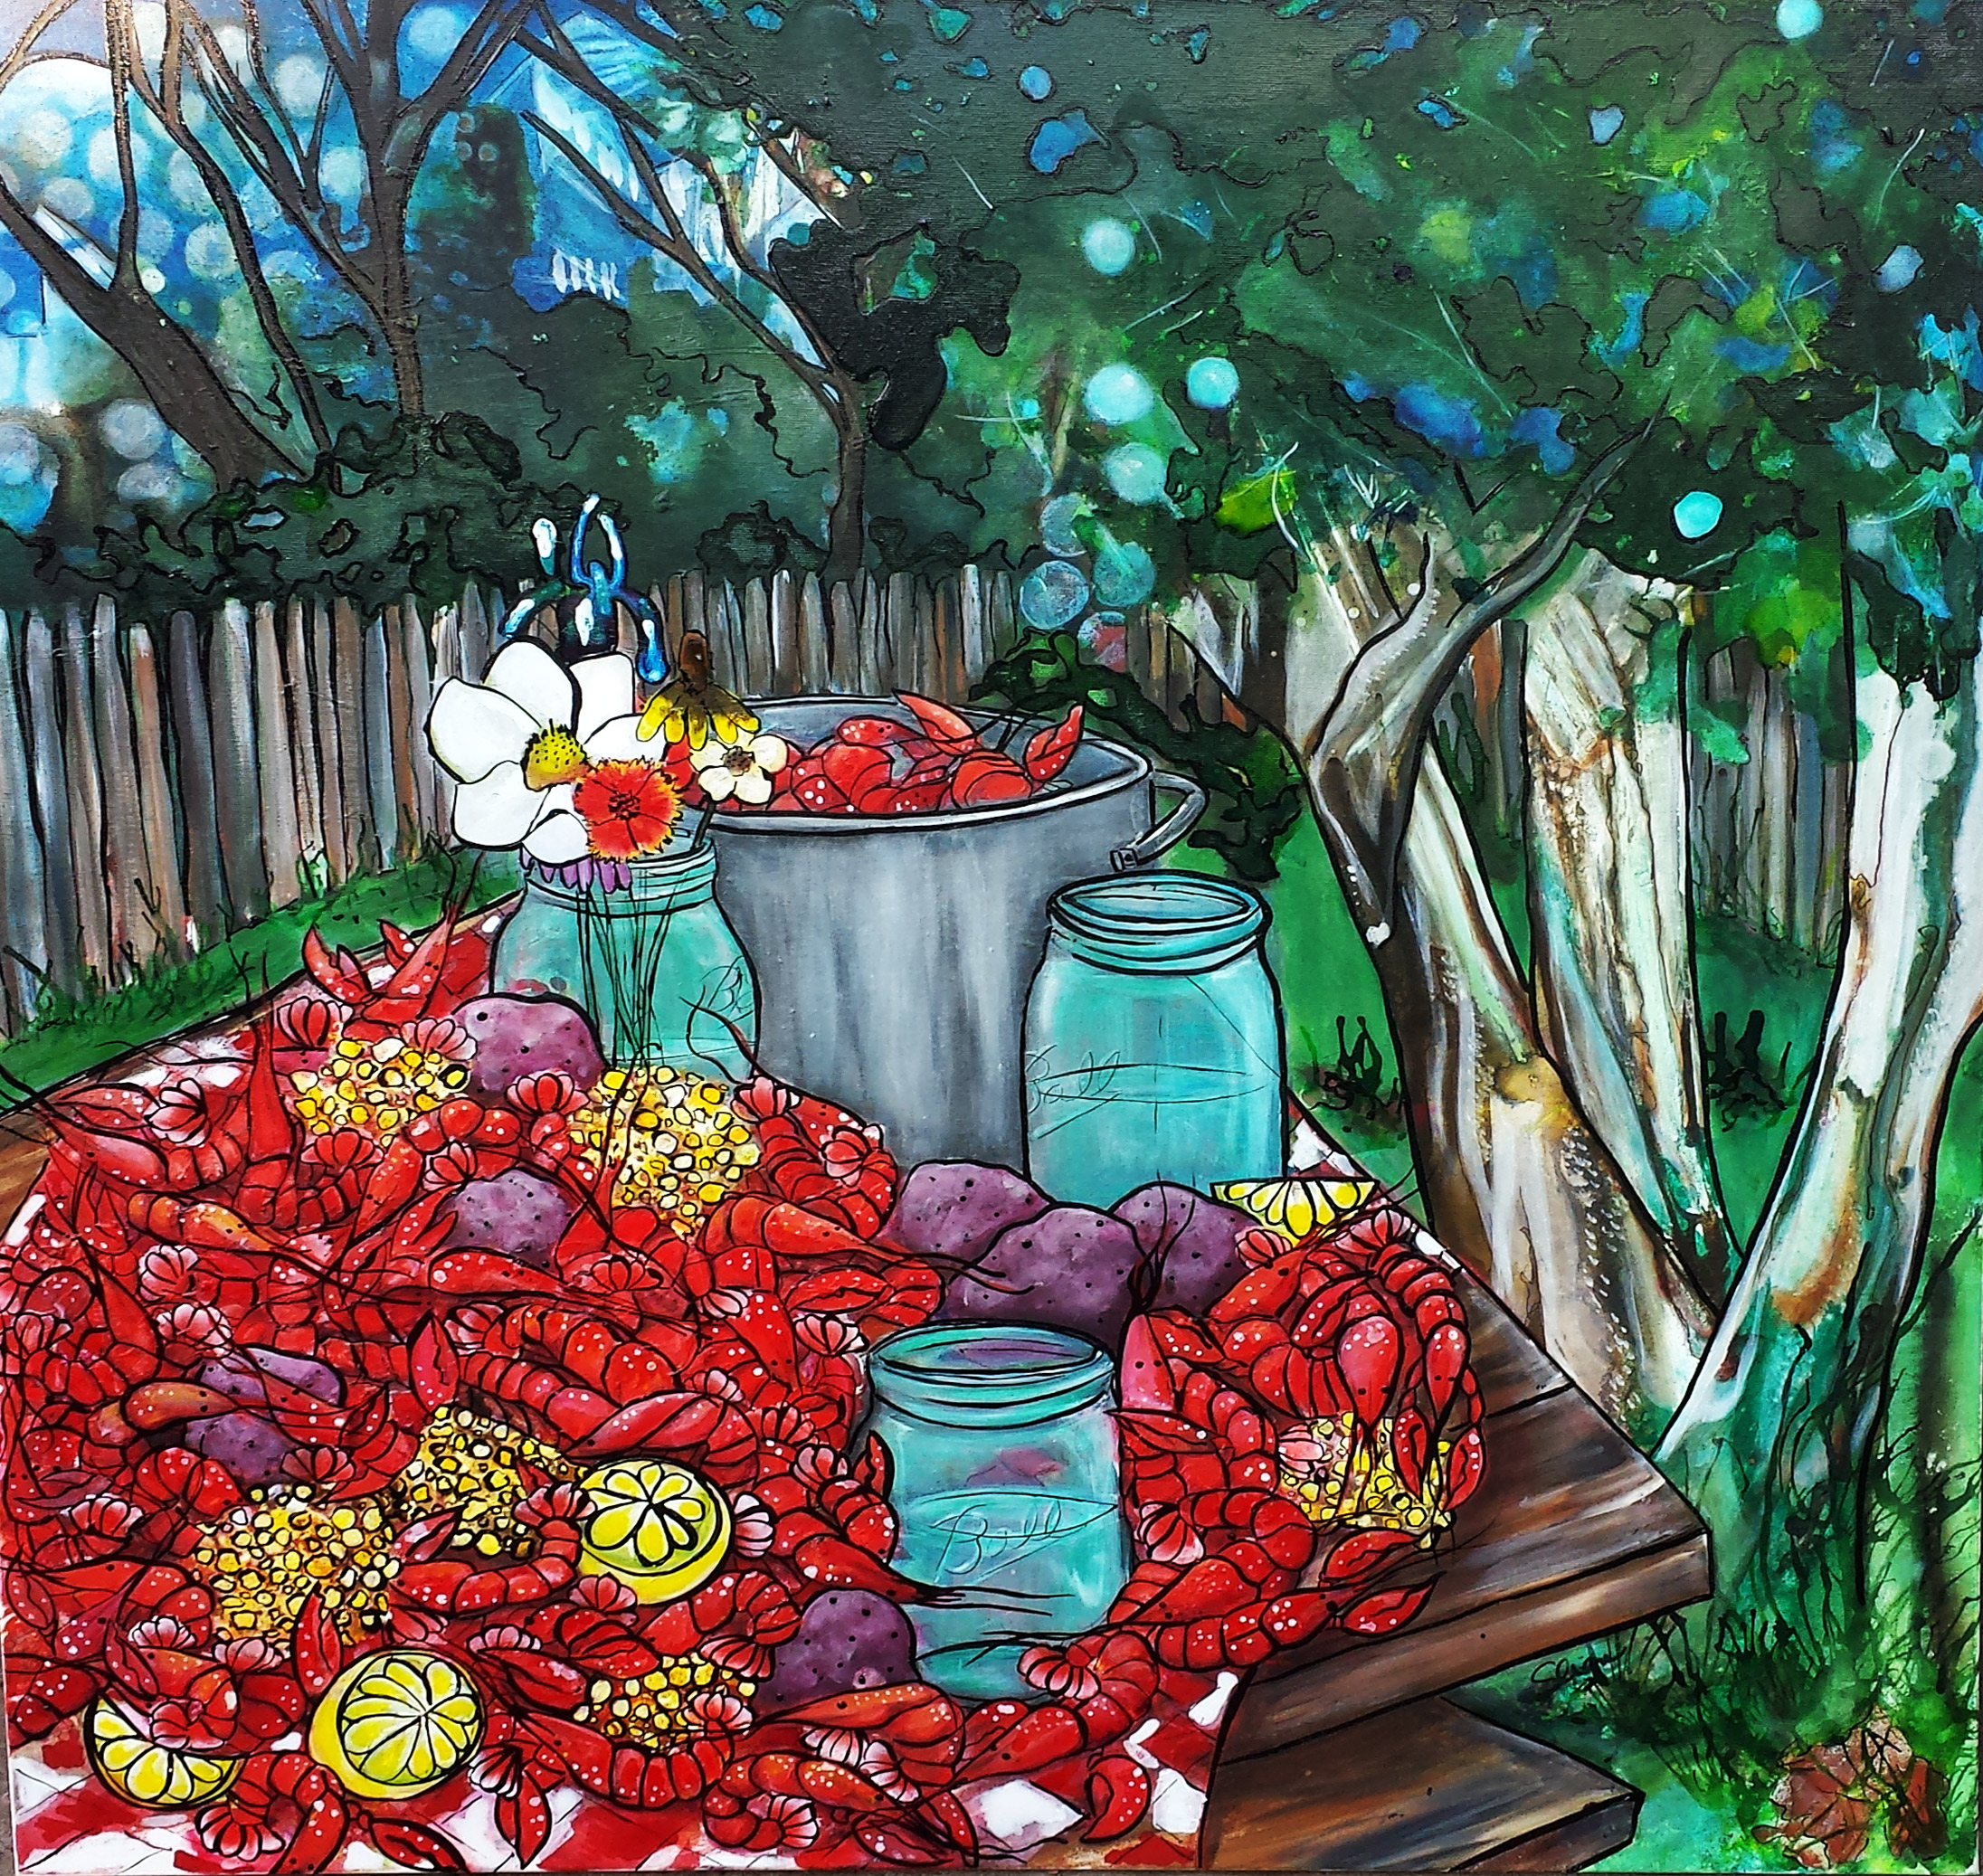 Moonshine and Mudbugs by artist Shannon Fannin